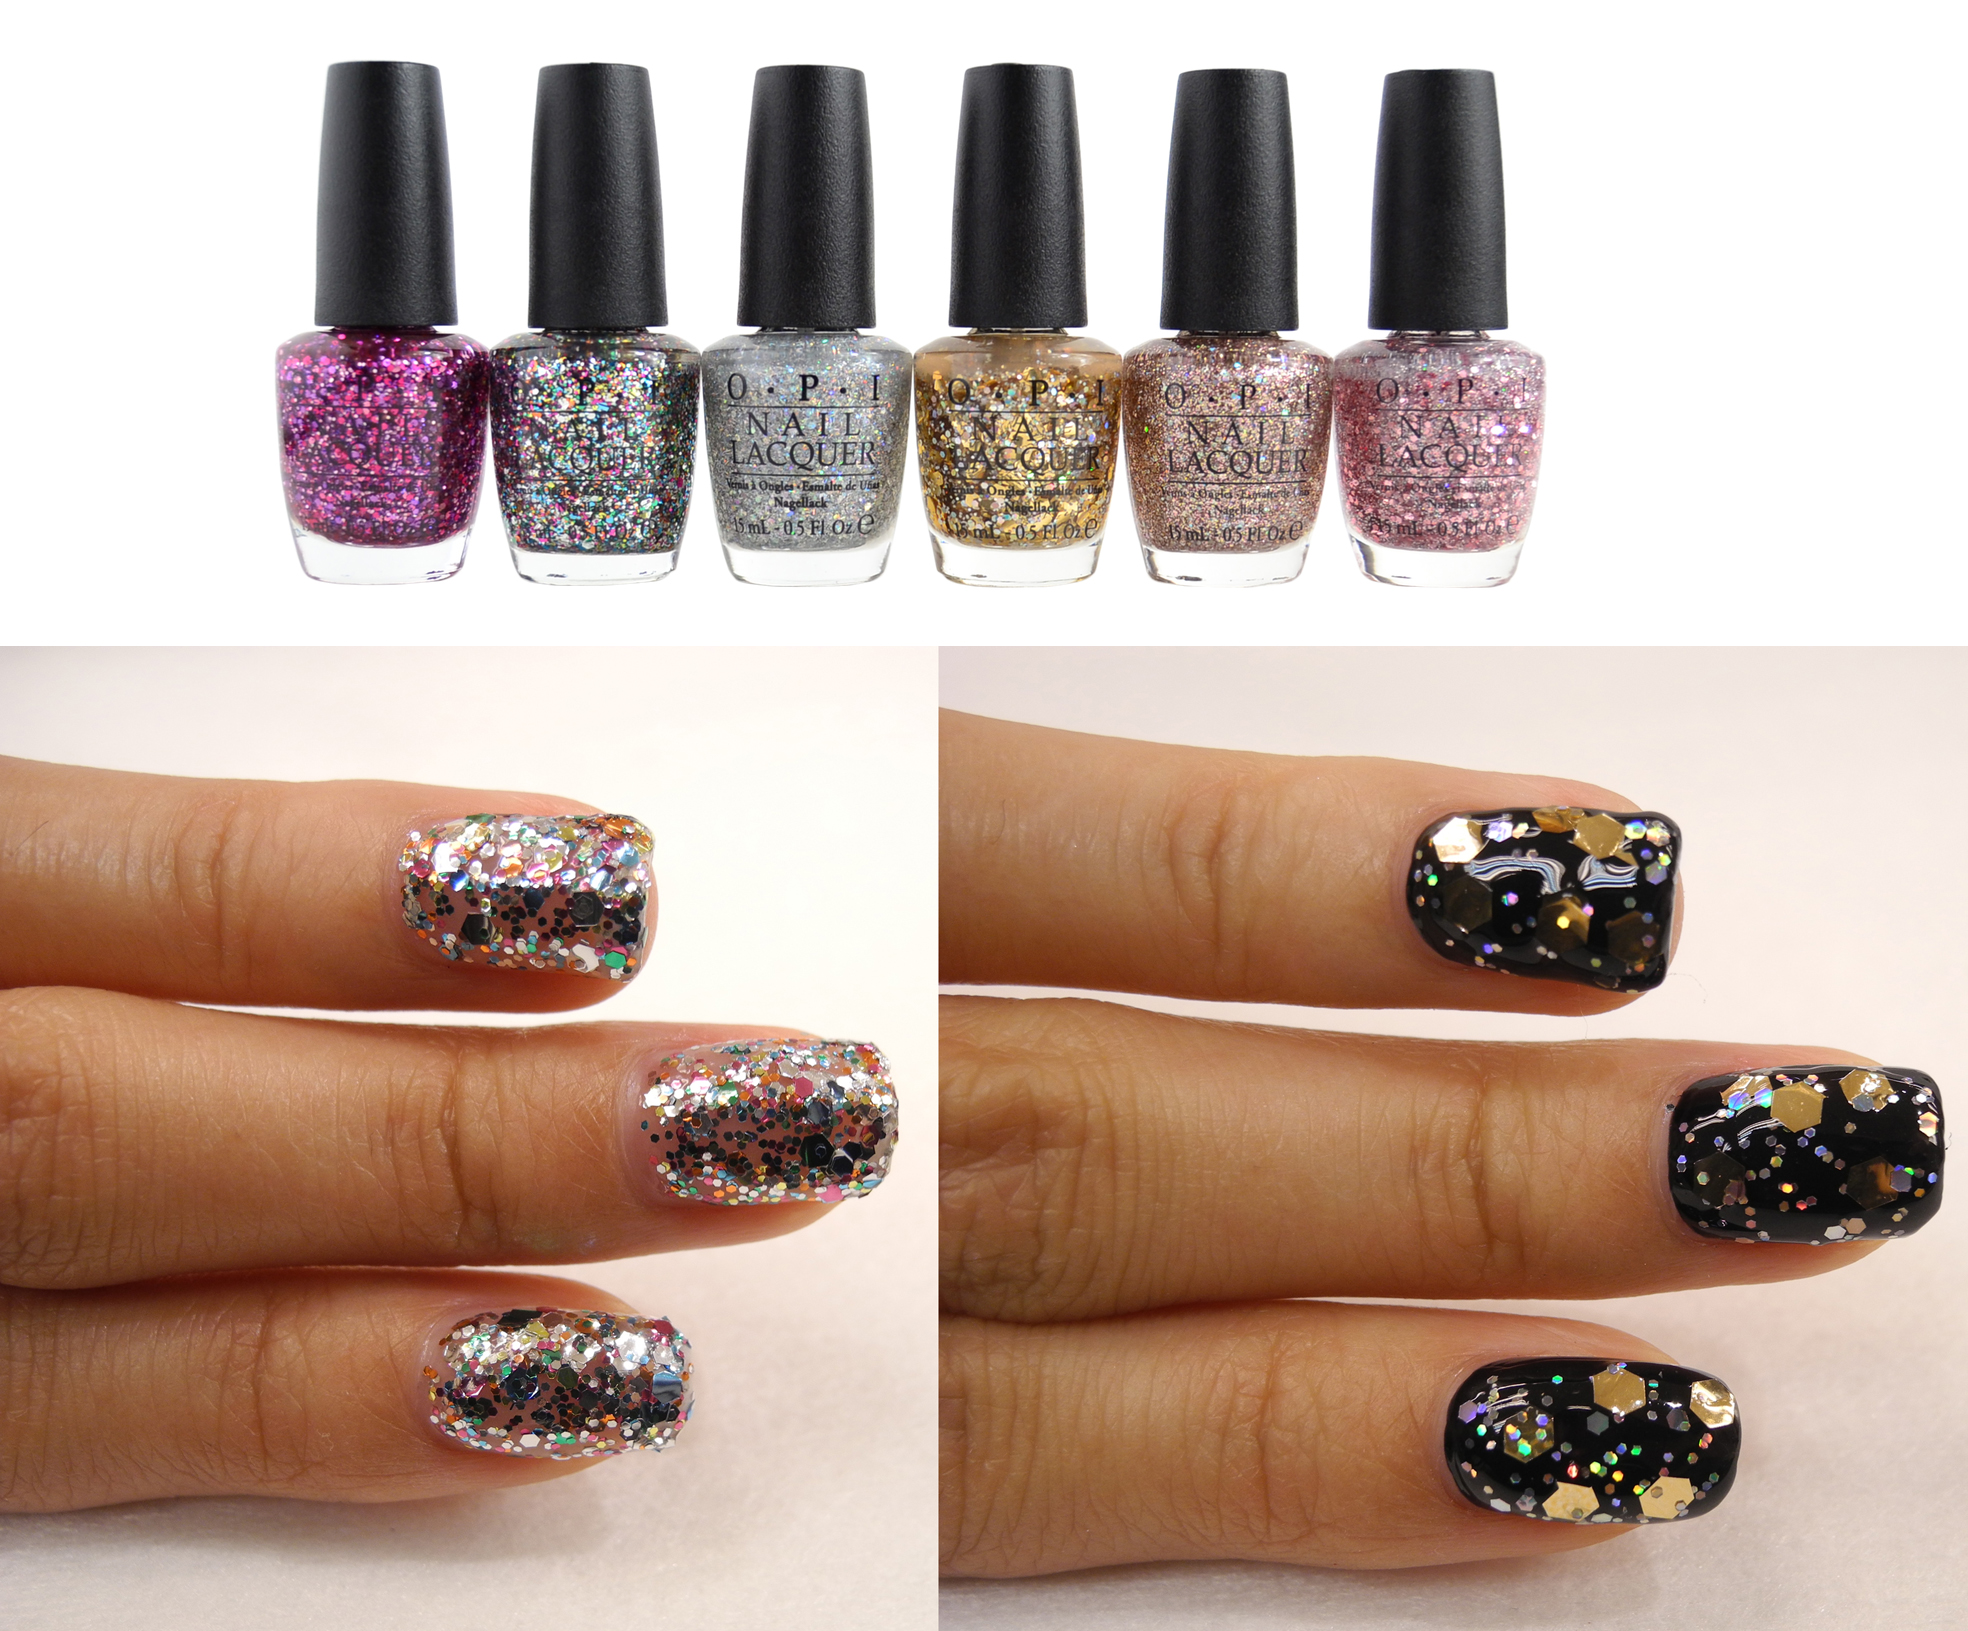 Bling summer outfit up! Spotlight On Glitter Collection Nail Lacquer | Rainbow Nails'